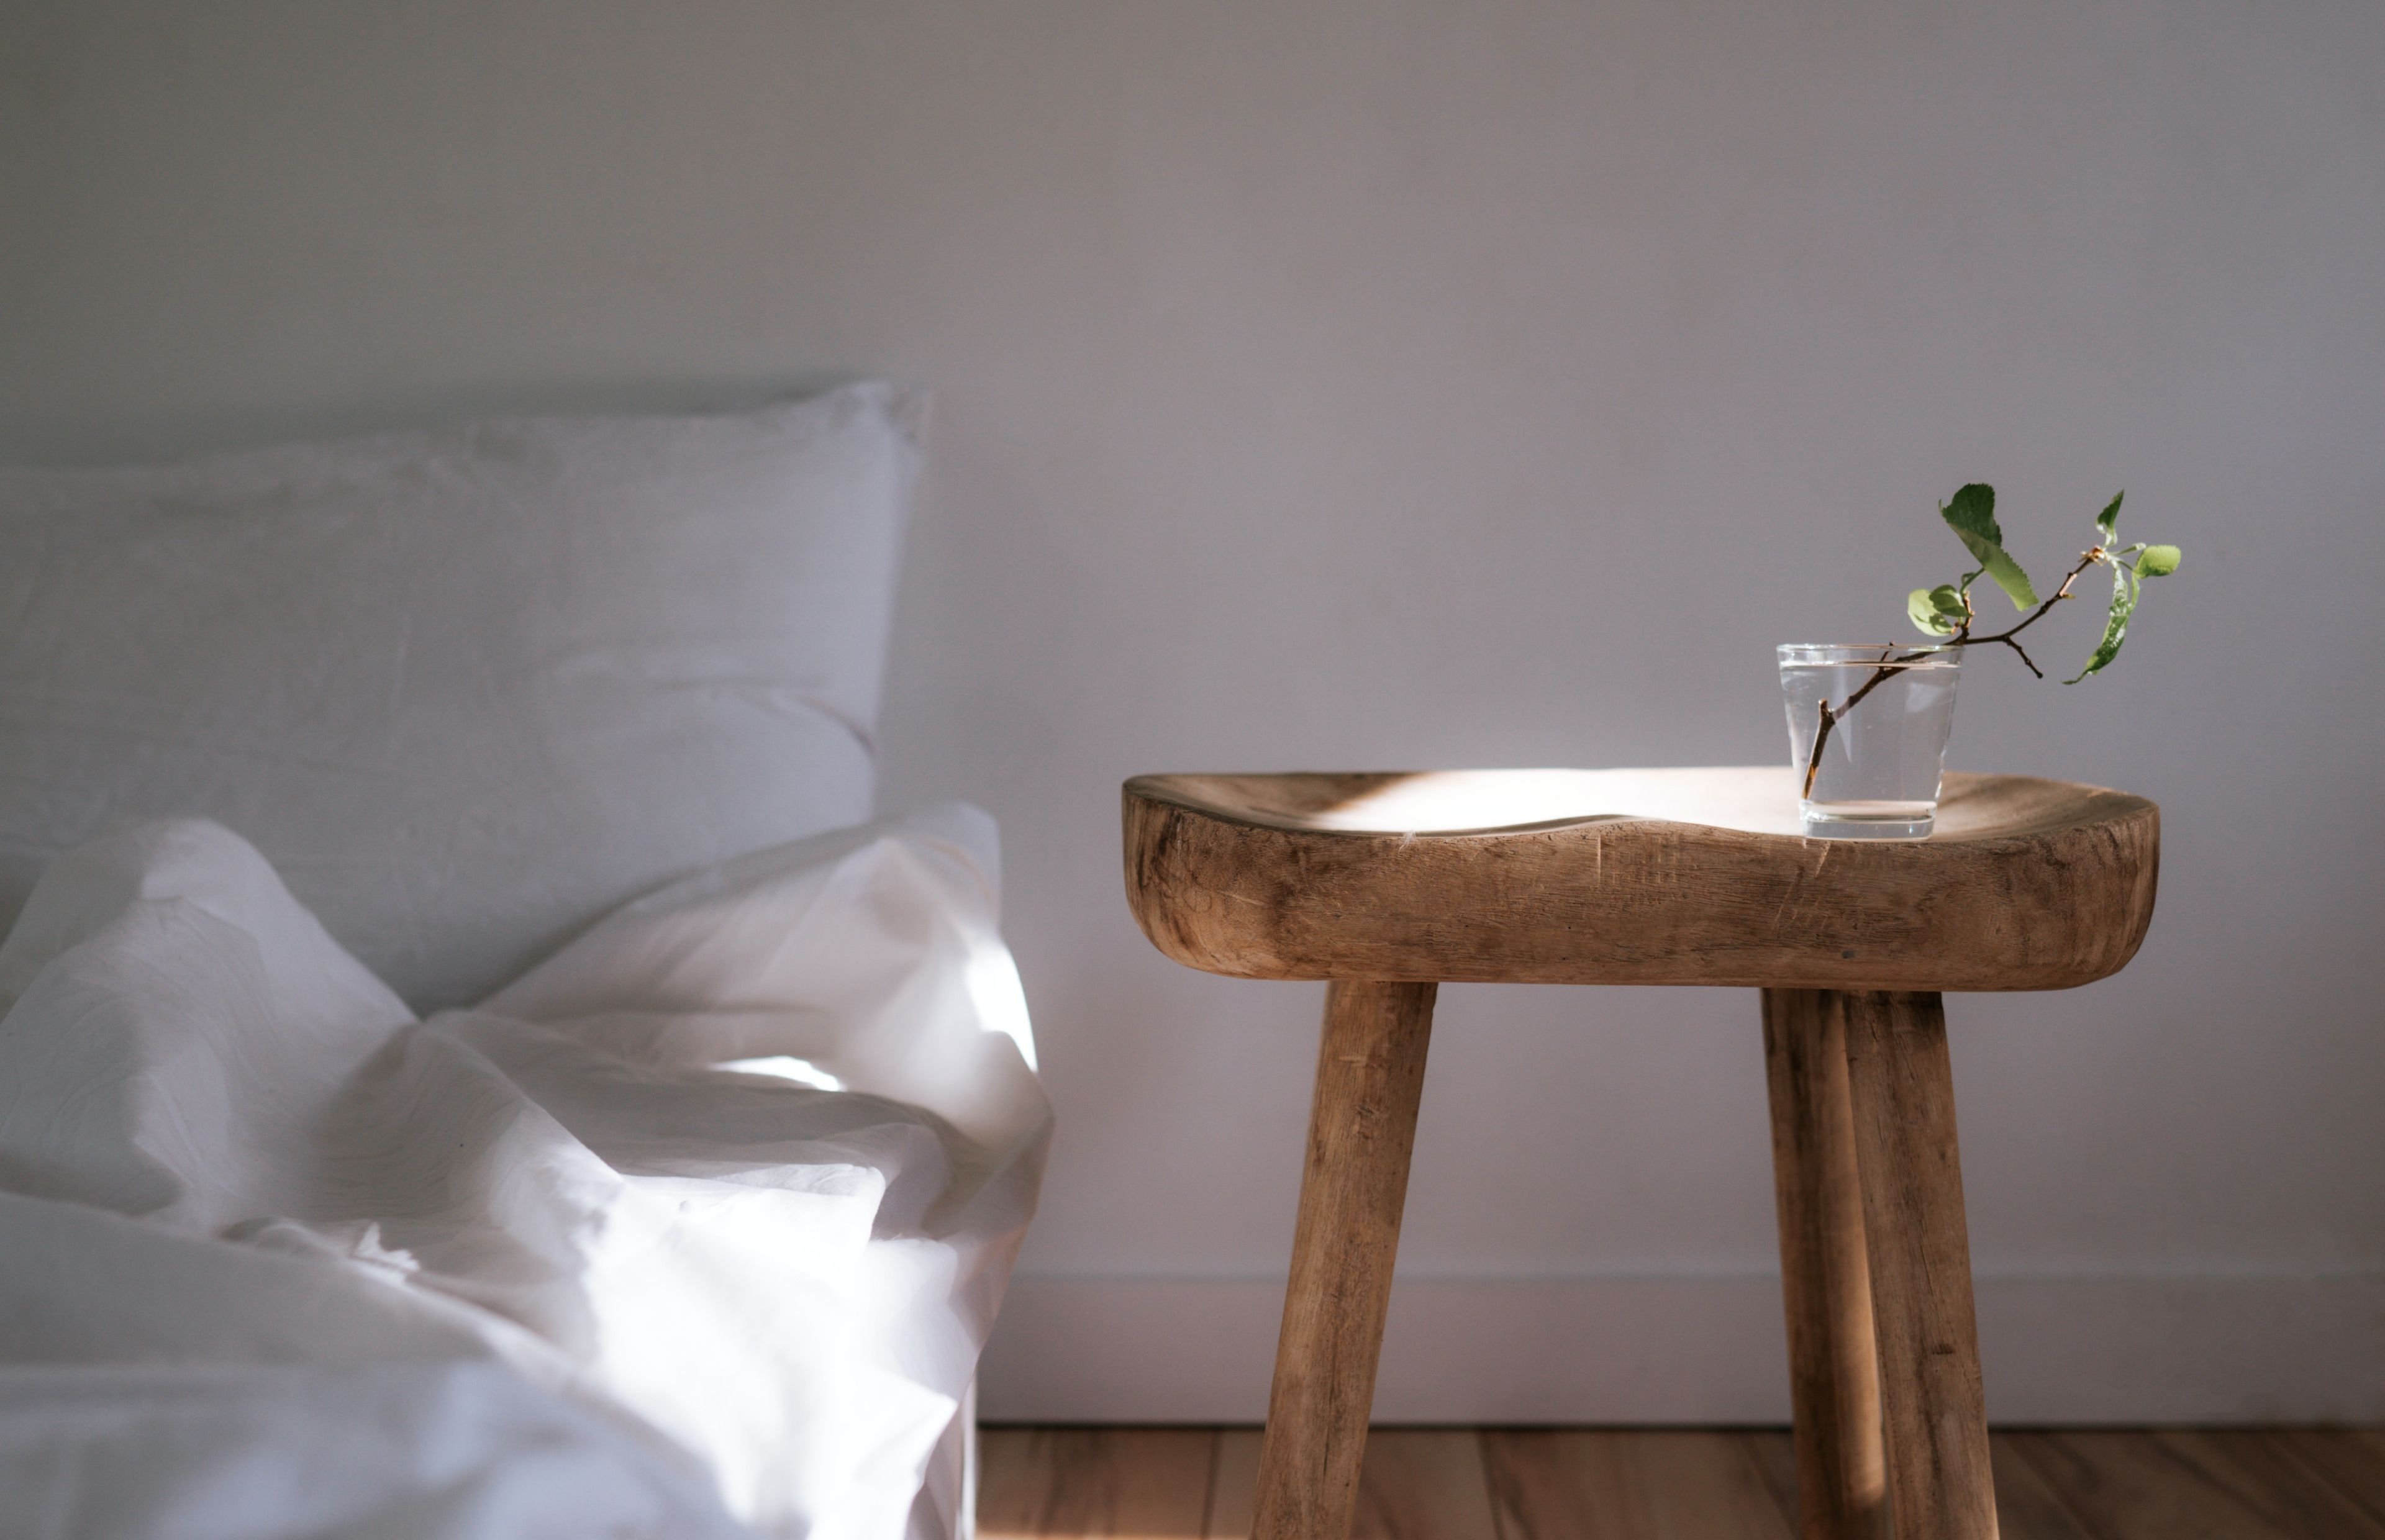 A glass cup filled with later with a branch on a wooden stool. by a white bed